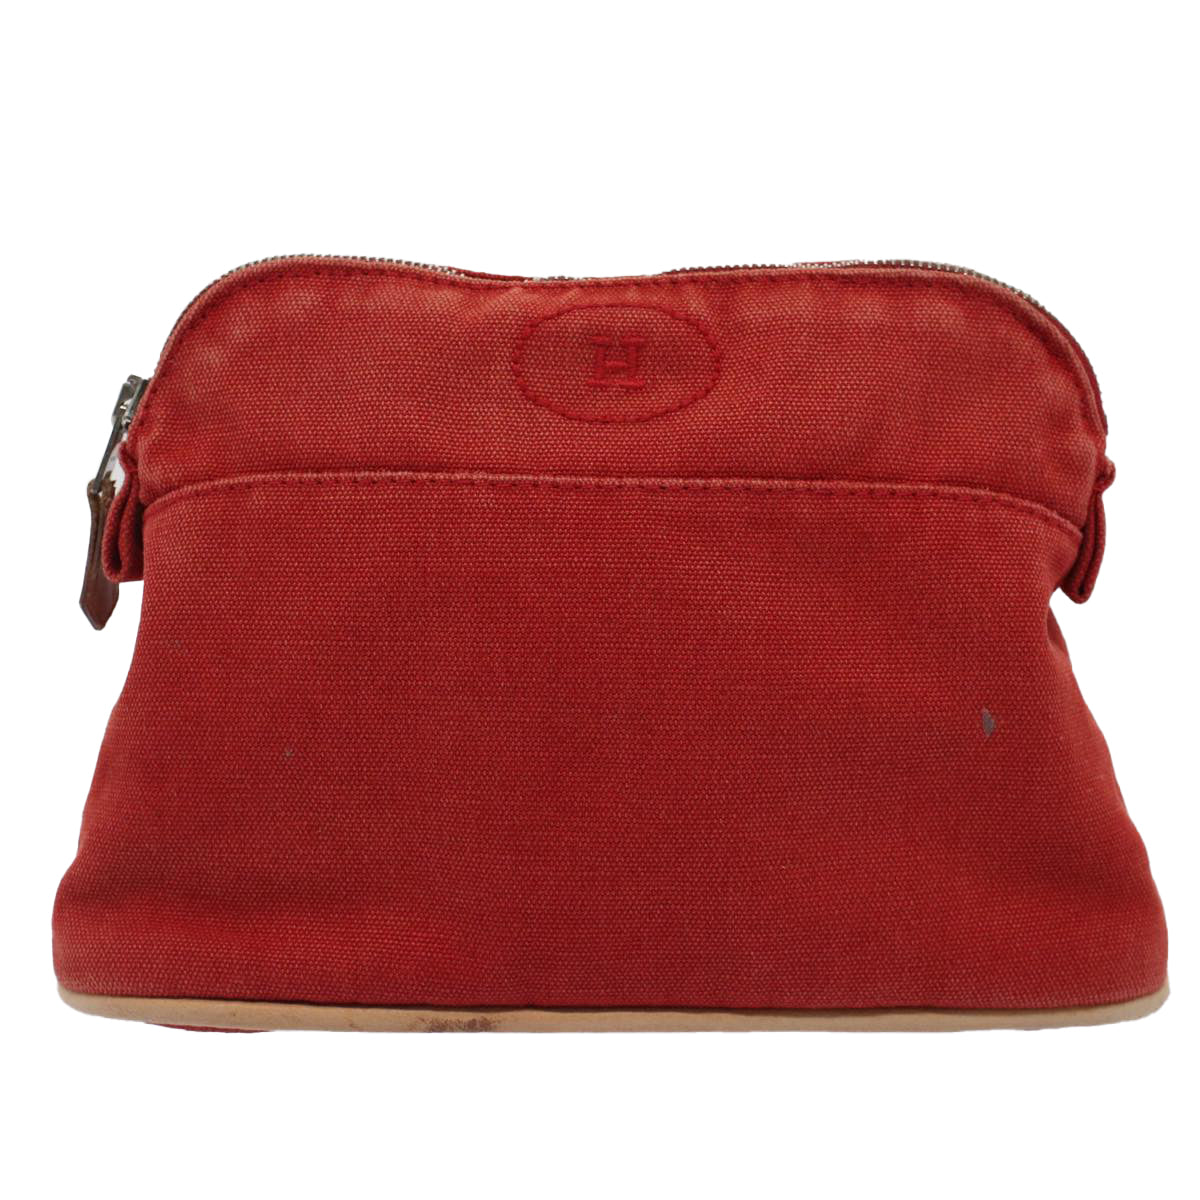 HERMES Pouch Canvas Red Auth 51305 - 0